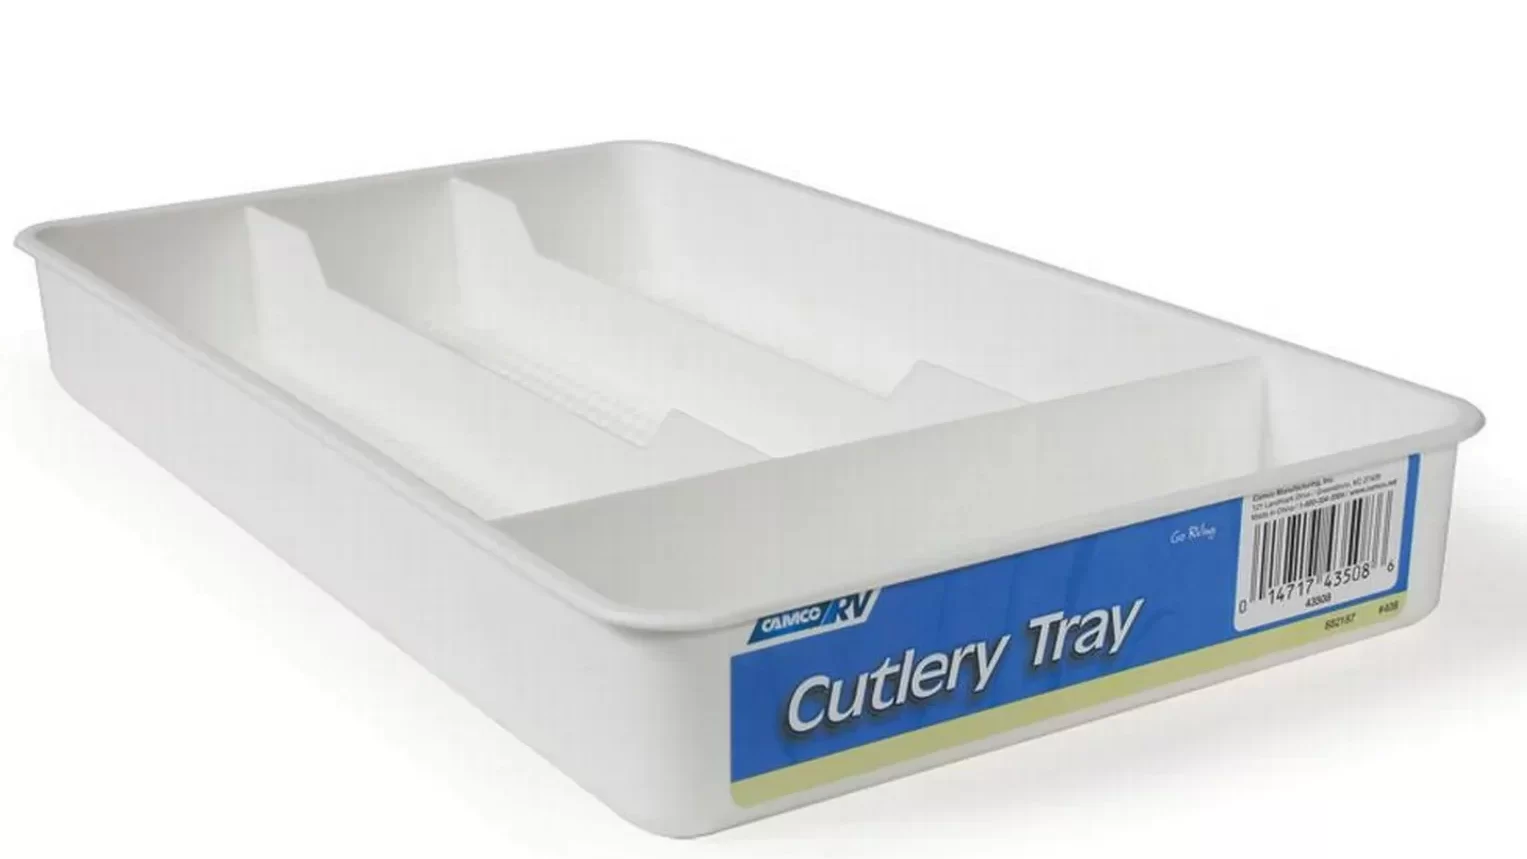 White Camco Cutlery Tray - For RV and Compact Kitchen Drawers